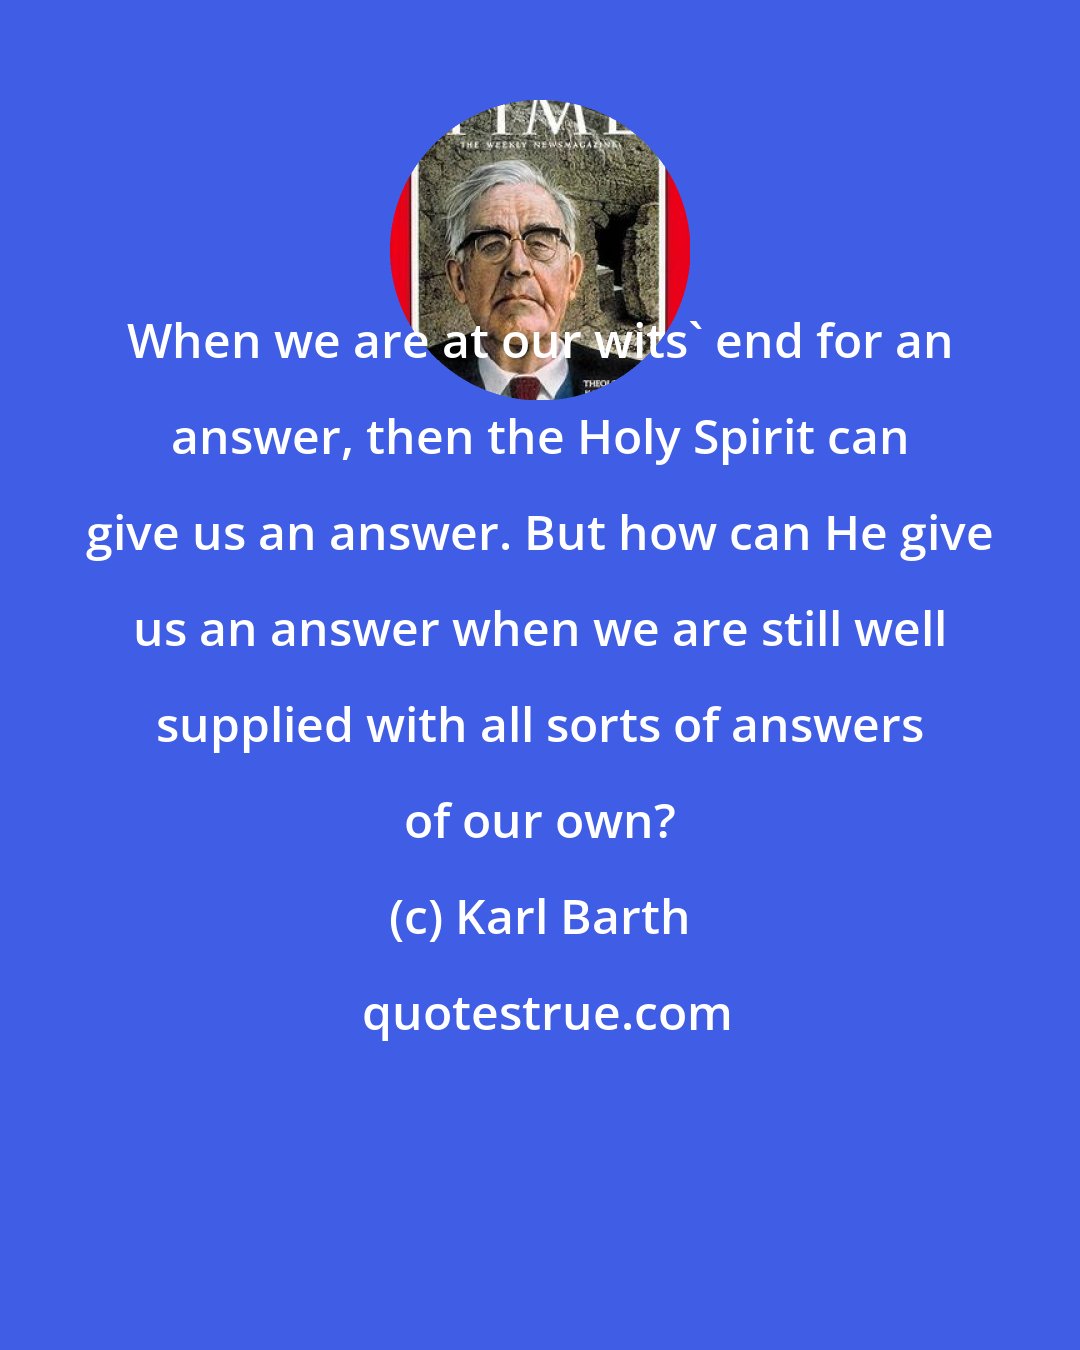 Karl Barth: When we are at our wits' end for an answer, then the Holy Spirit can give us an answer. But how can He give us an answer when we are still well supplied with all sorts of answers of our own?